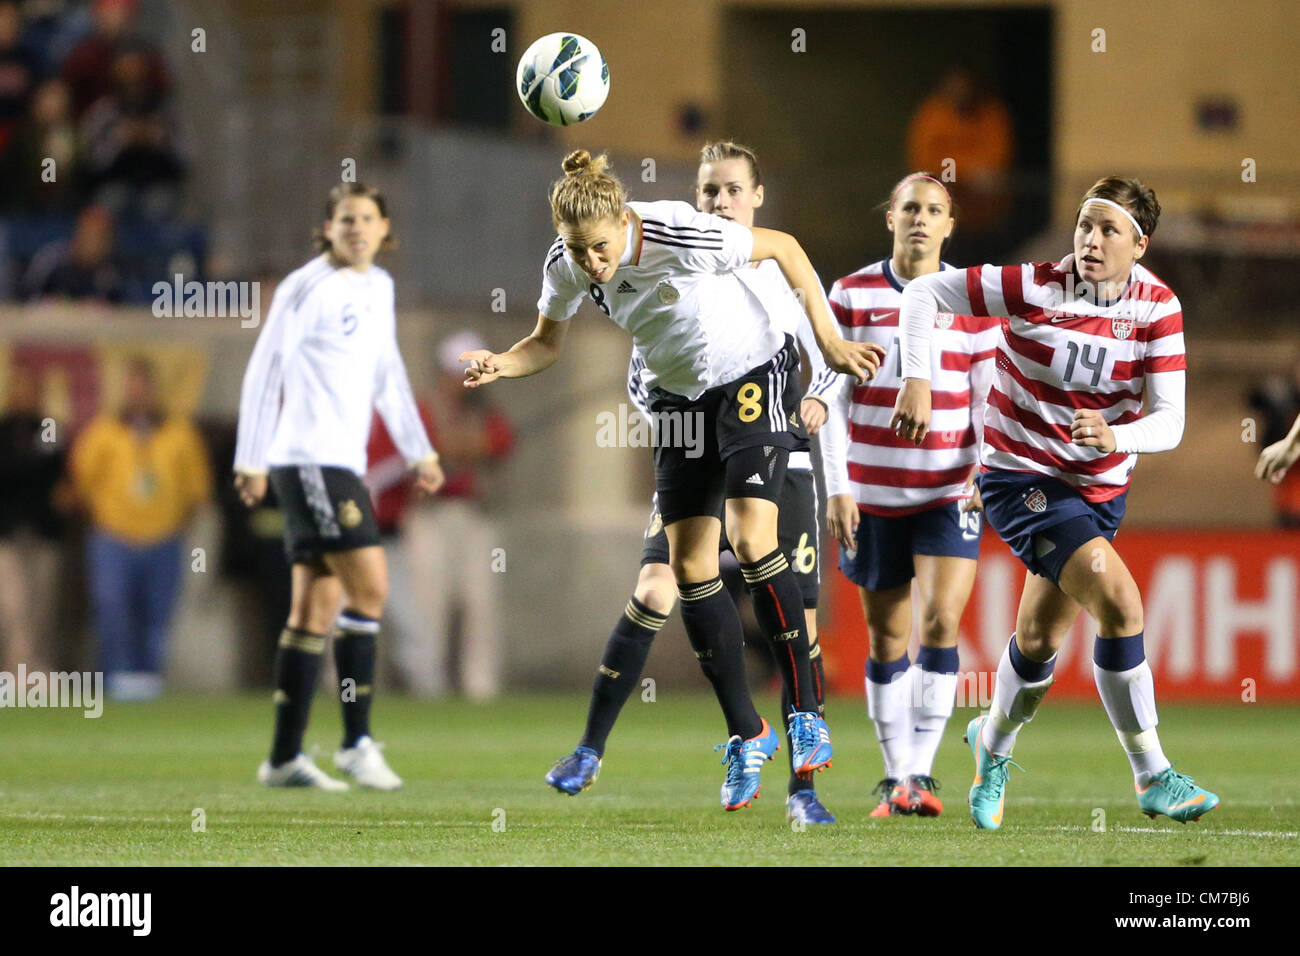 20.10.2012. Chicago, USA.  Kim Kulig (GER) (8) heads the ball away from Abby Wambach (USA) (14). The United States Women's National Team played the Germany Women's National Team at Toyota Park in Bridgeview, Illinois in a women's international friendly soccer match. The game ended in a 1-1 tie. Stock Photo